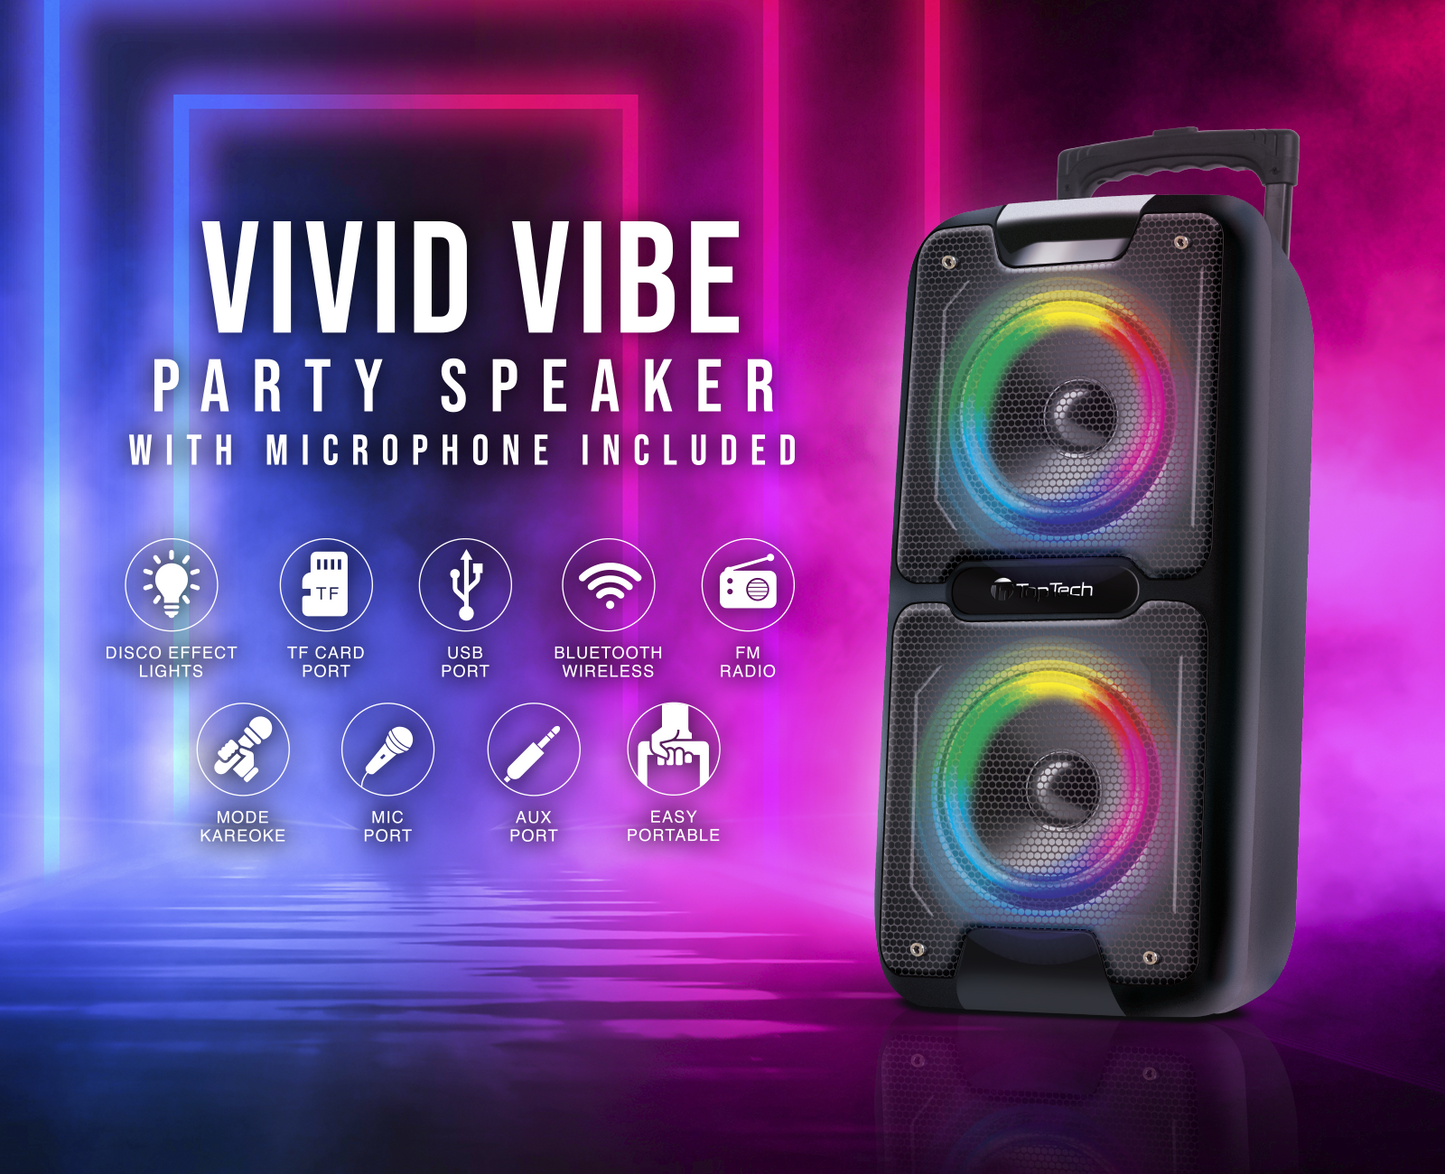 TOPTECH AL-101, 2x6.5 Inch Bluetooth Speaker,Wireless Stereo Sound Portable Speaker with Vivid Vibe Disco Lights,  Support for USB/TF Card/FM Radio/AUX,  Long Playtime for Outdoor Party Gift